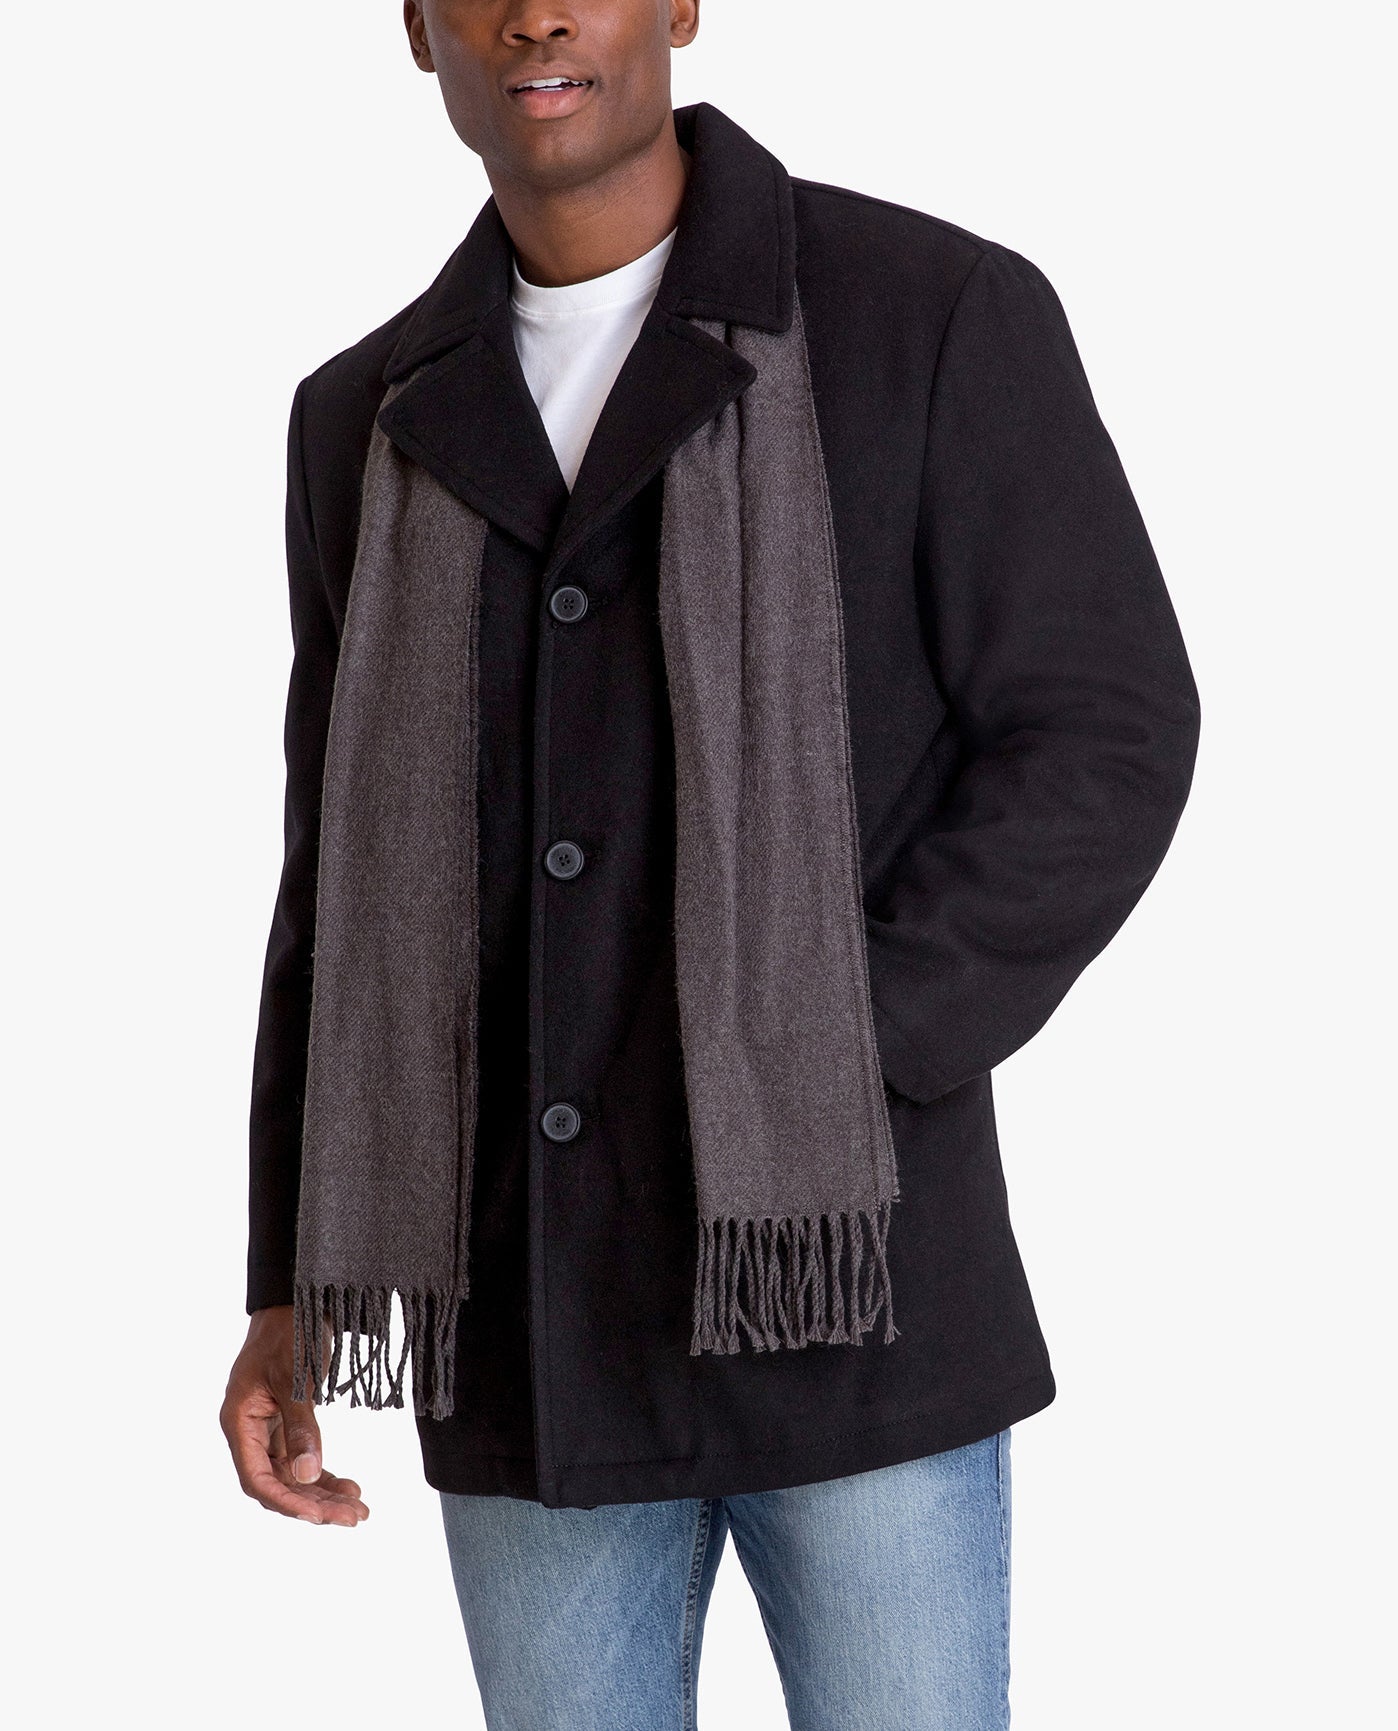 ALT VIEW OF AMITY SINGLE BREASTED WOOL JACKET | BLACK